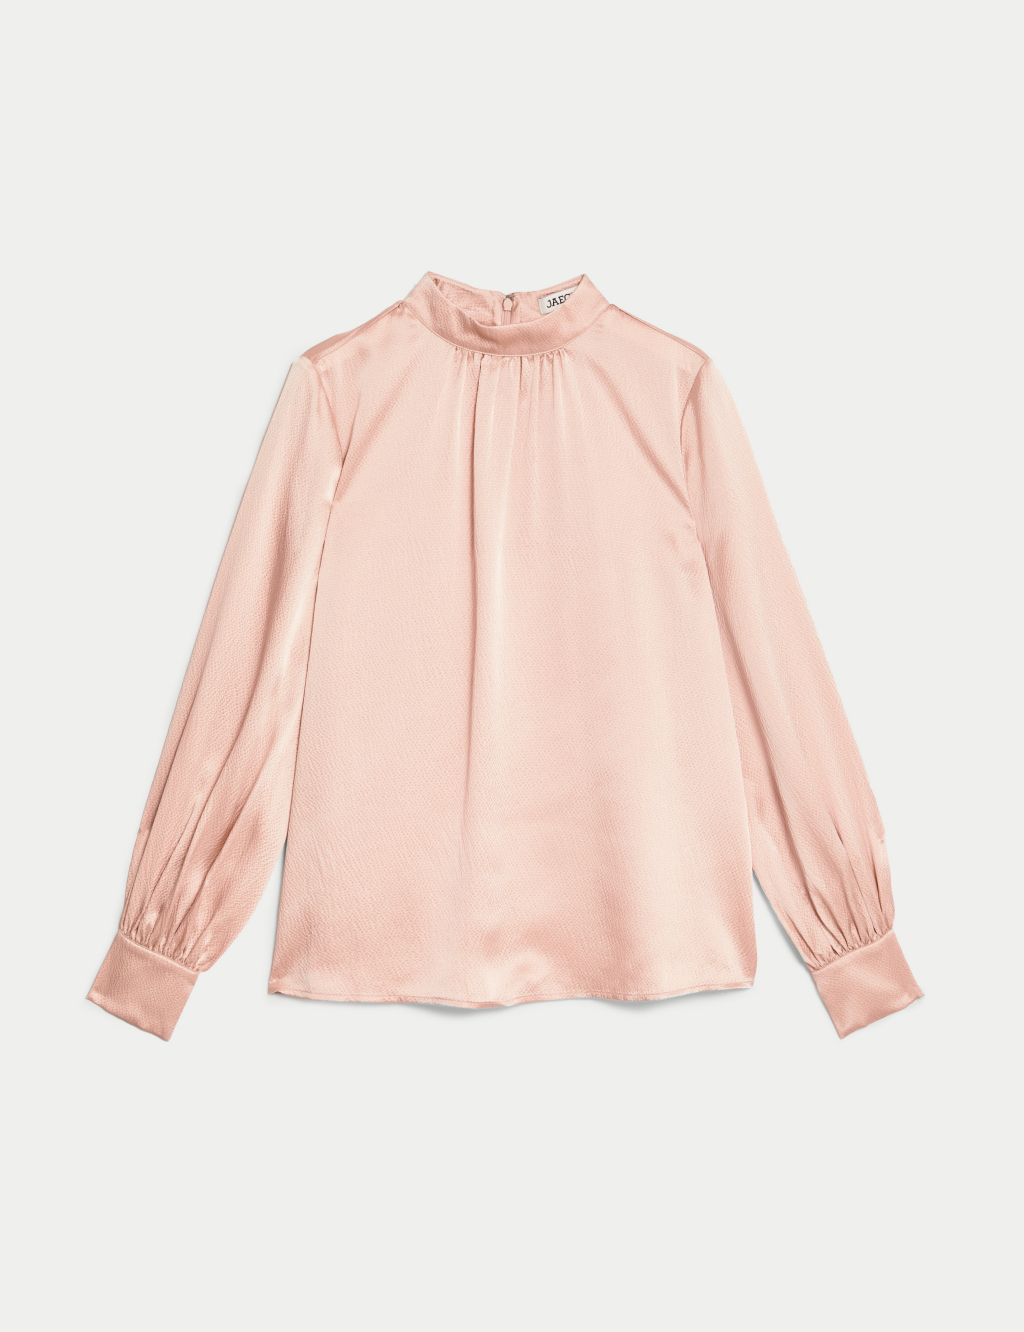 Pure Silk Textured Funnel Neck Blouse image 2